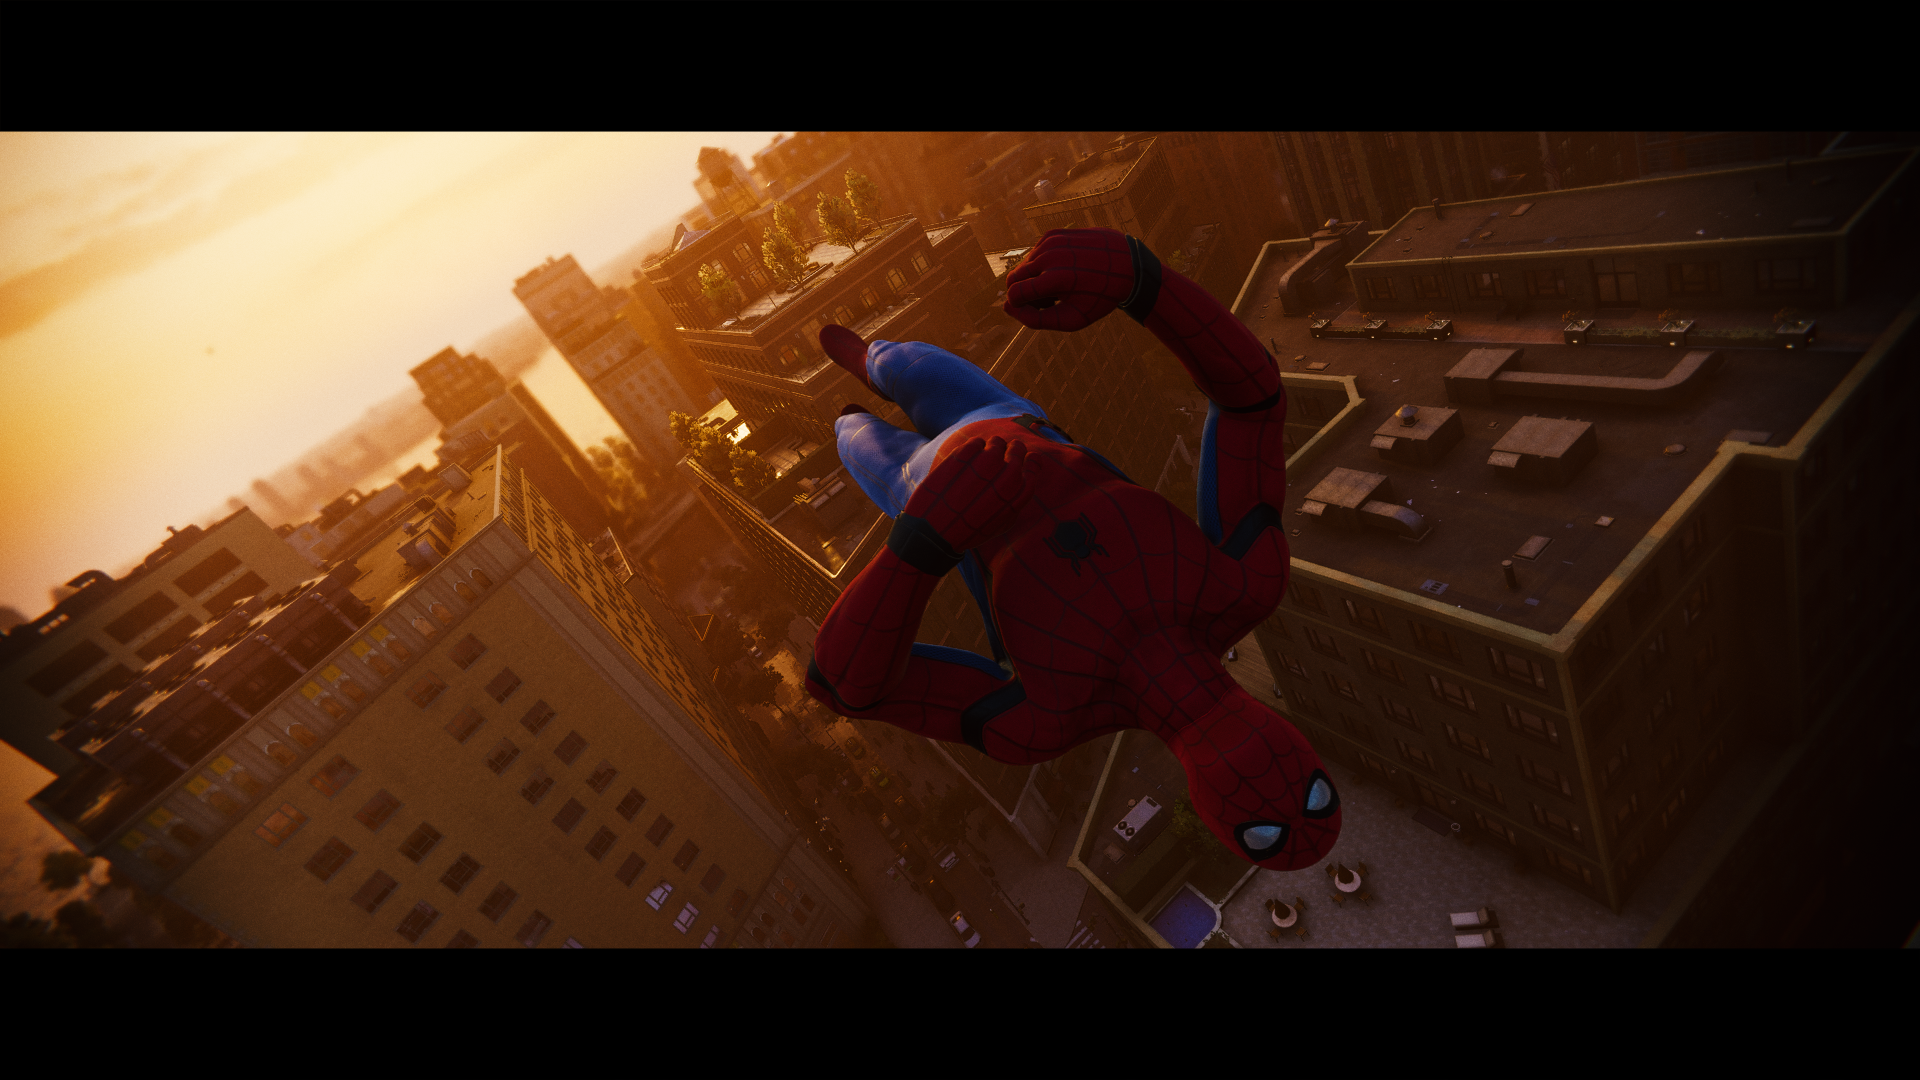 spider_man_ps4___backstroke_by_thebmz-dcmnito.png